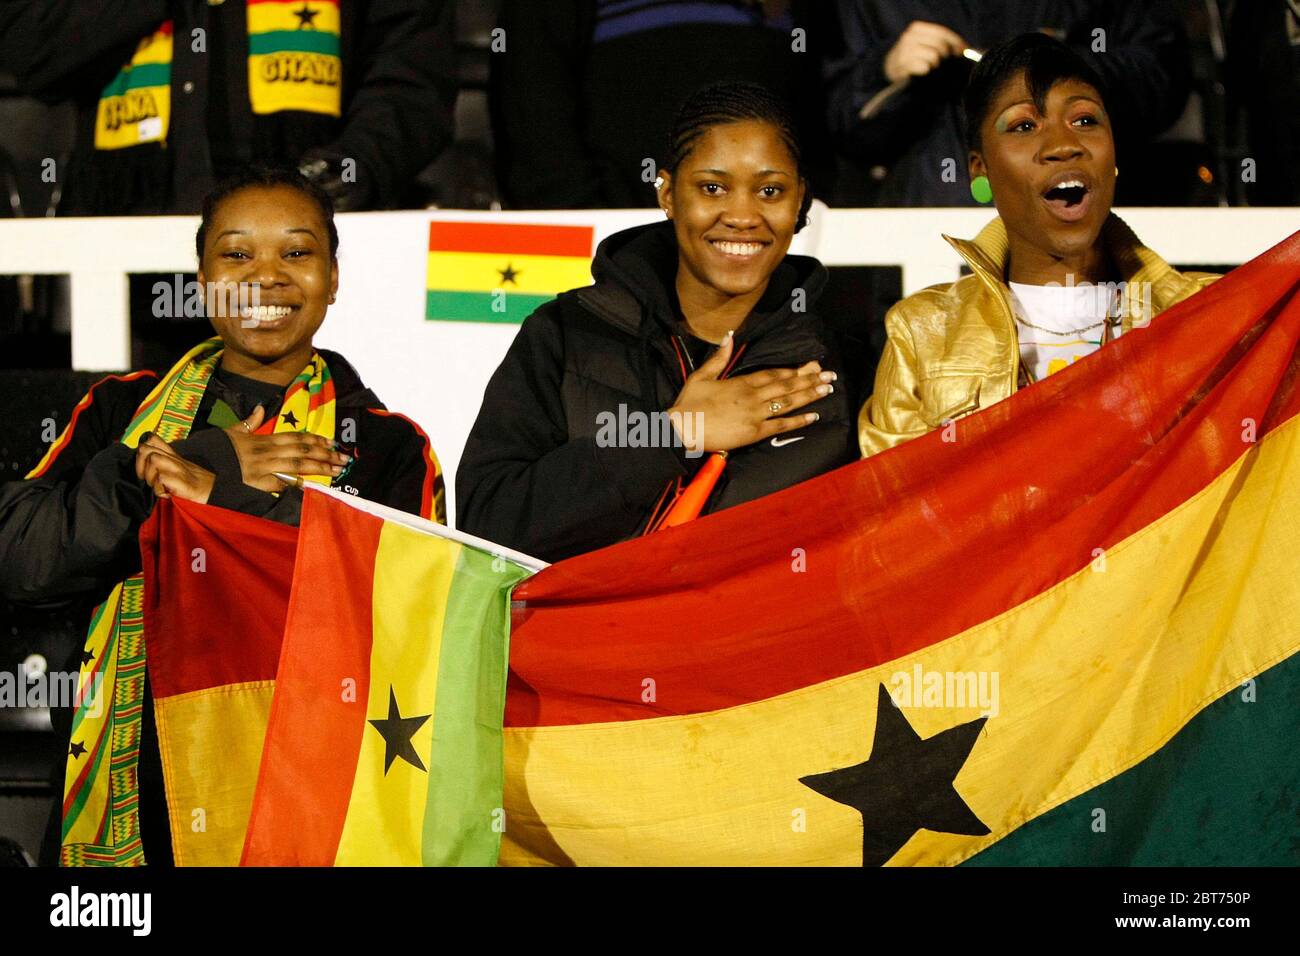 LONDON, UK. MARCH 26: Ghana fans  during International Friendly between Mexico City and Ghana at Craven Cottage, Fulham 26 March, 2008 Stock Photo